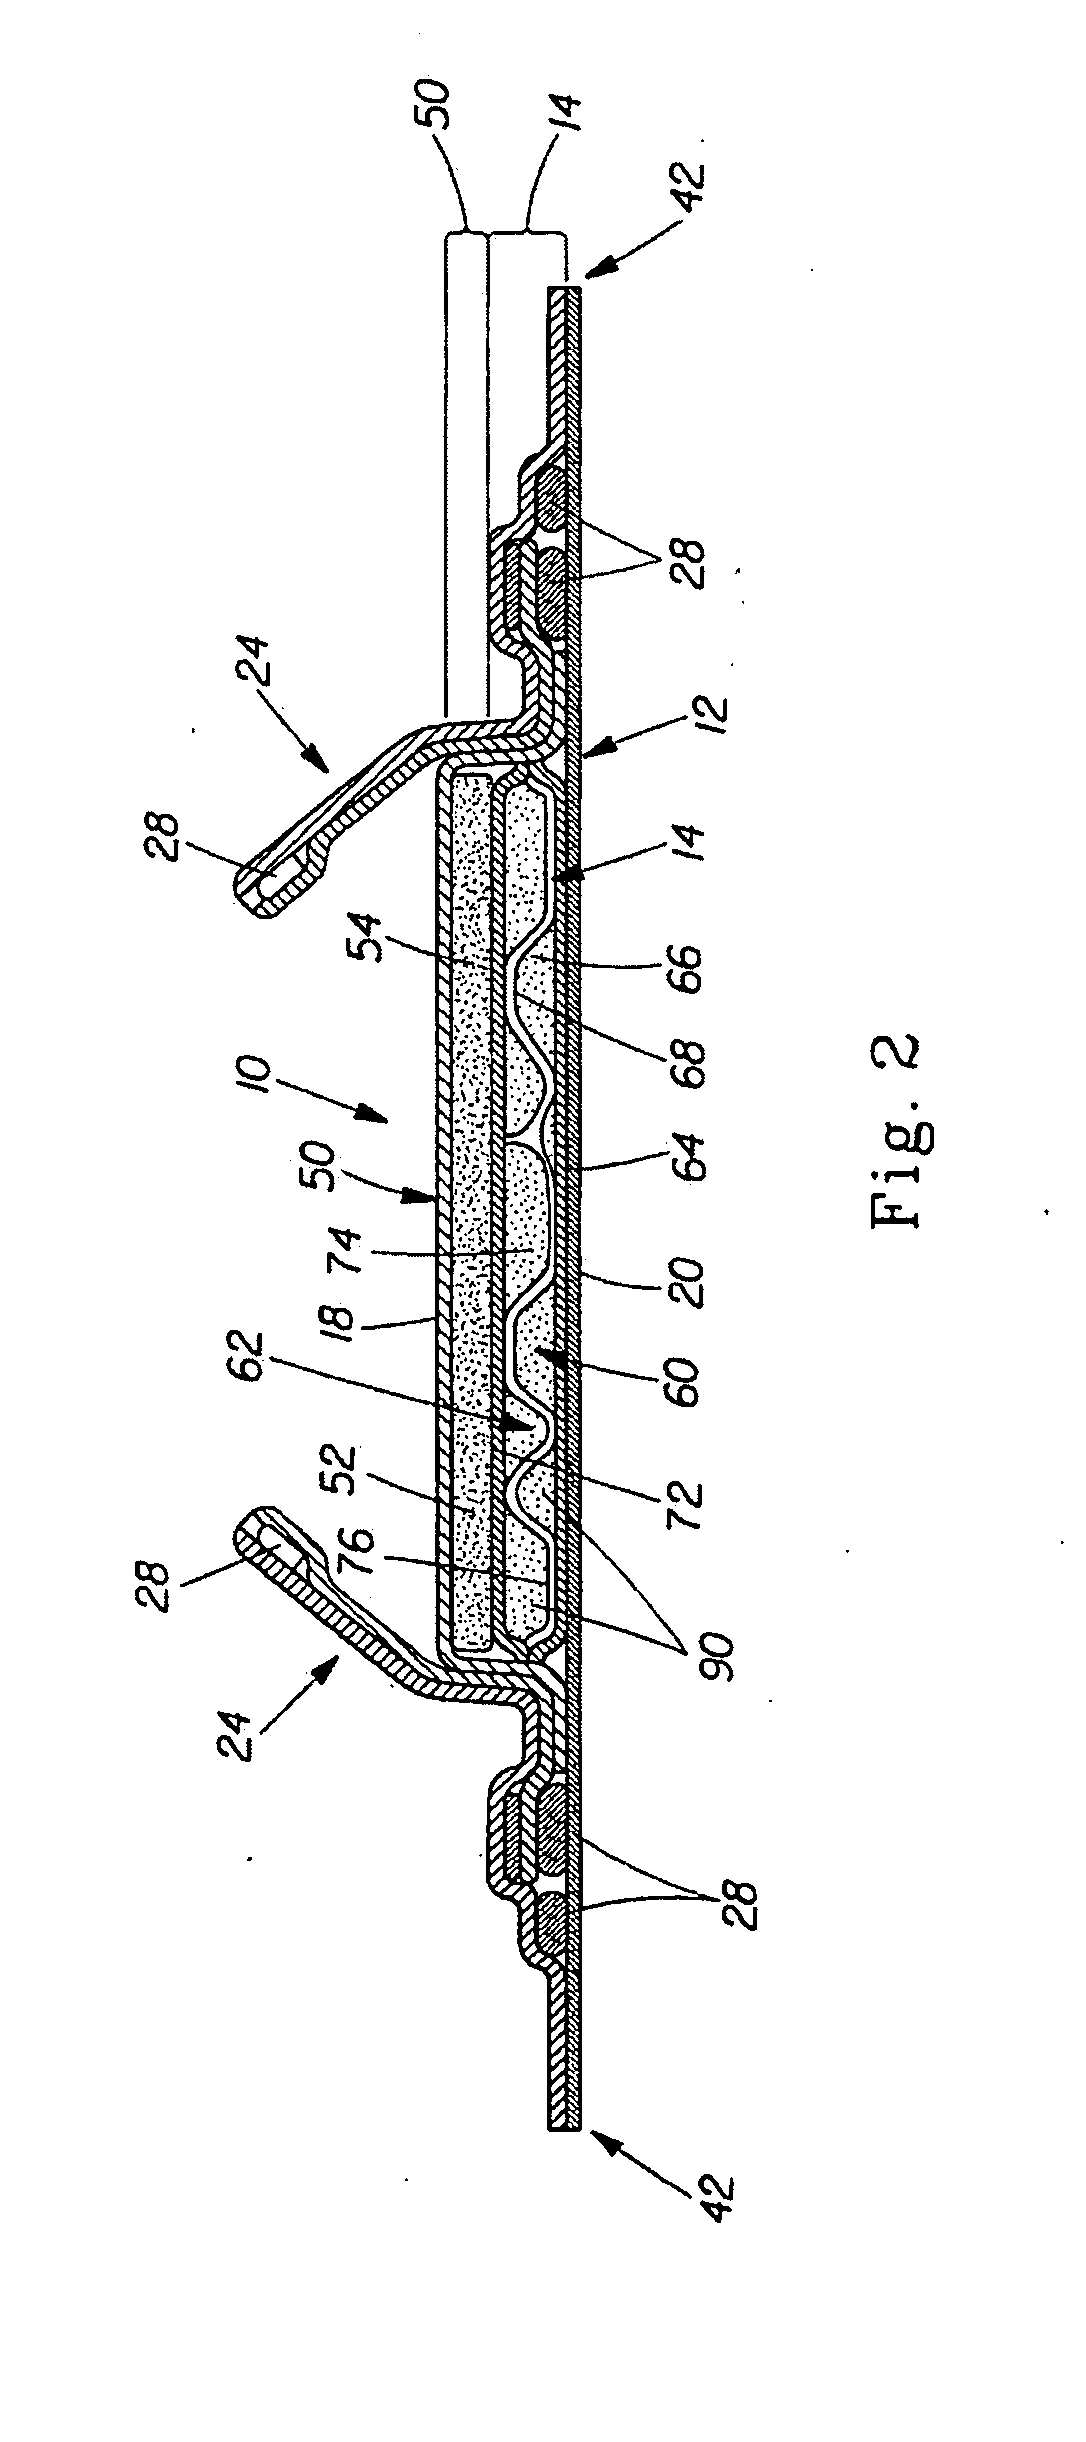 Disposable Absorbent Article With Sealed Absorbent Core With Substantially Continuously Distributed Absorbent Particulate Polymer Material